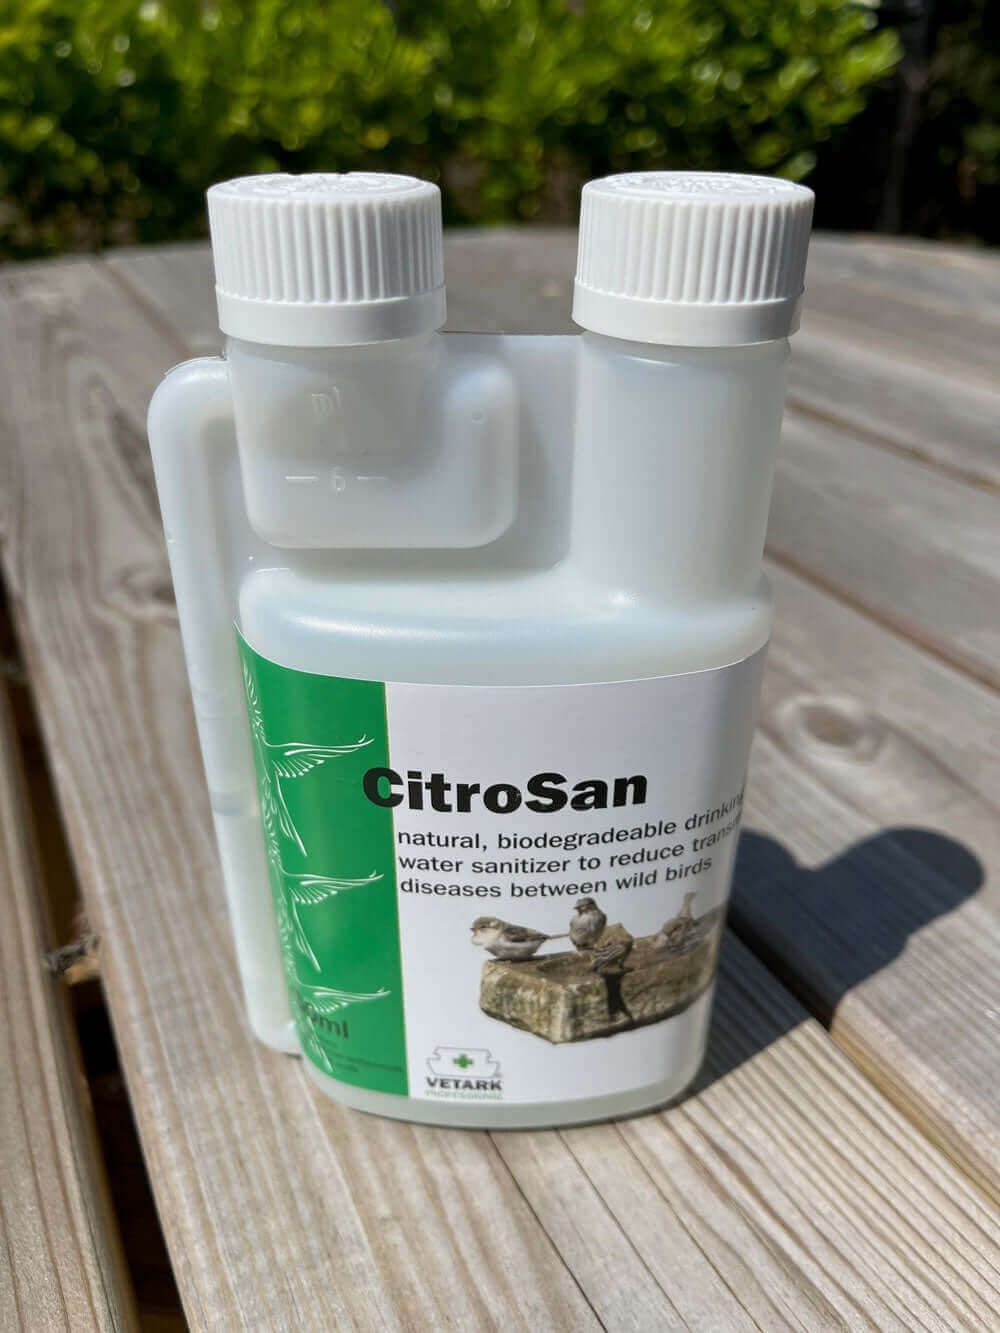 CitroSan comes in a 250ml bottle with built in 10ml measure it is non toxic, GM free and a natural sanitizer against a wide range of pathogens.